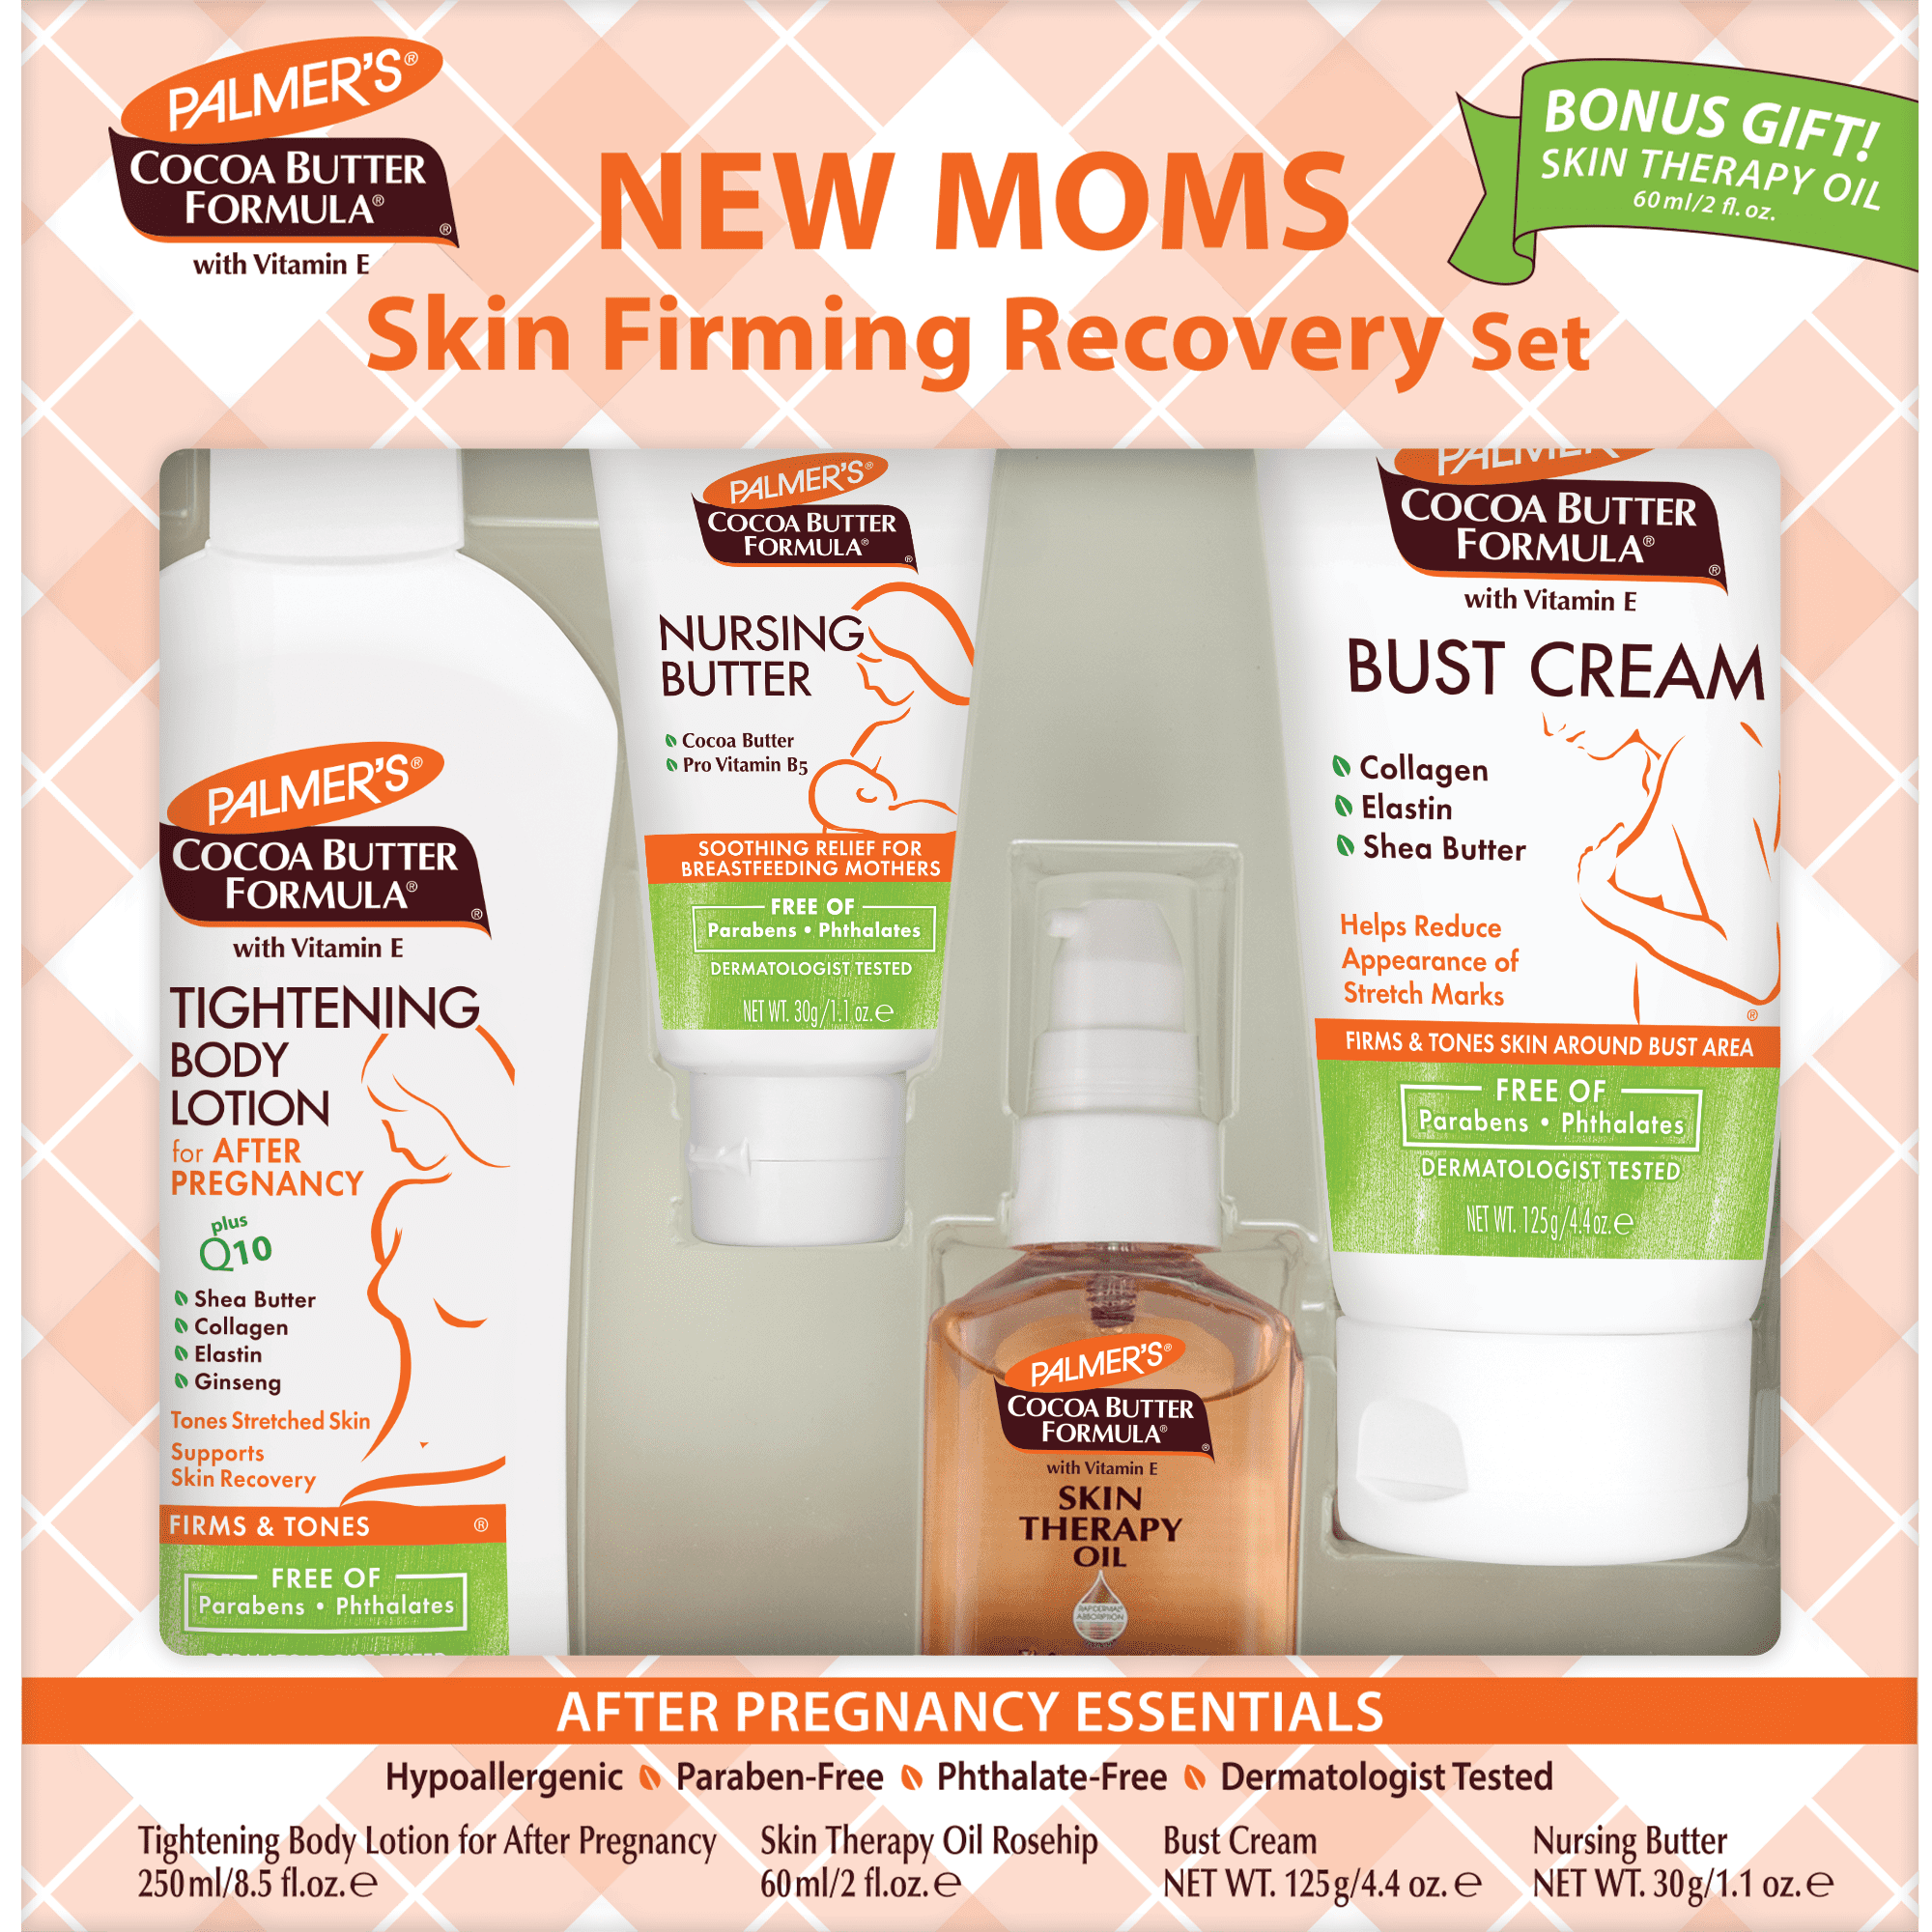 Palmers Cocoa Butter Formula New Moms Skin Recovery